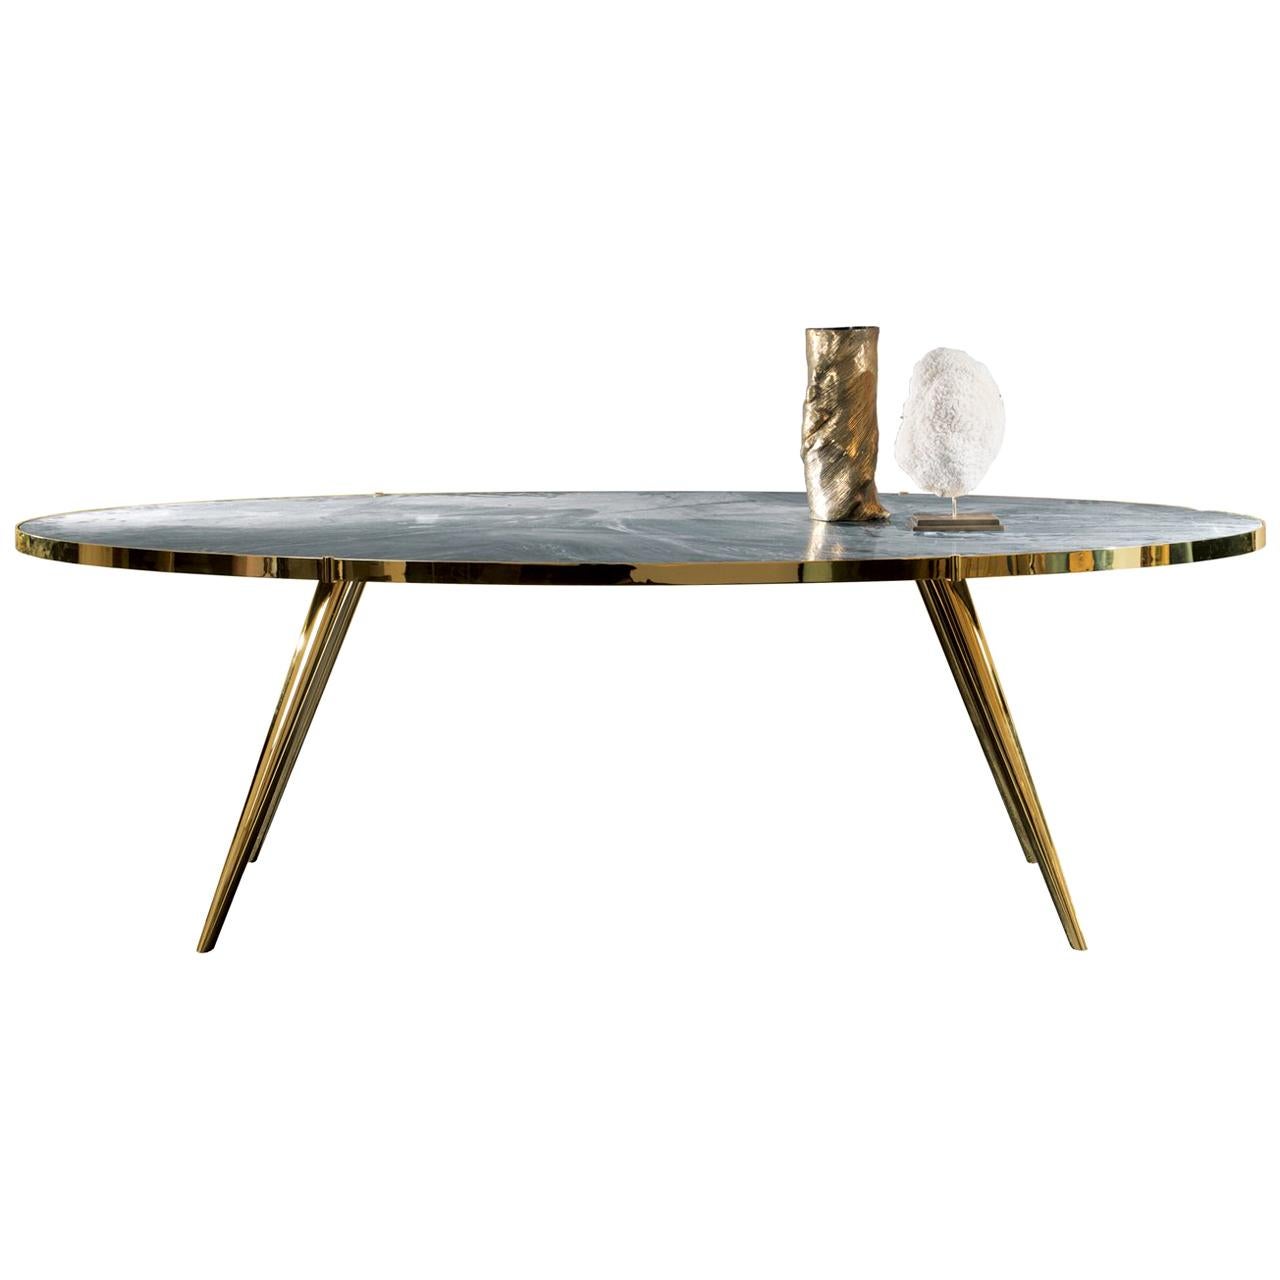 Part of the Jerome collection, this dining table boasts tapered and slanted legs that give it a midcentury allure, supporting an oval top. Sophisticated and timeless, this piece is made of metal with a glossy brass finish, included the mounting of